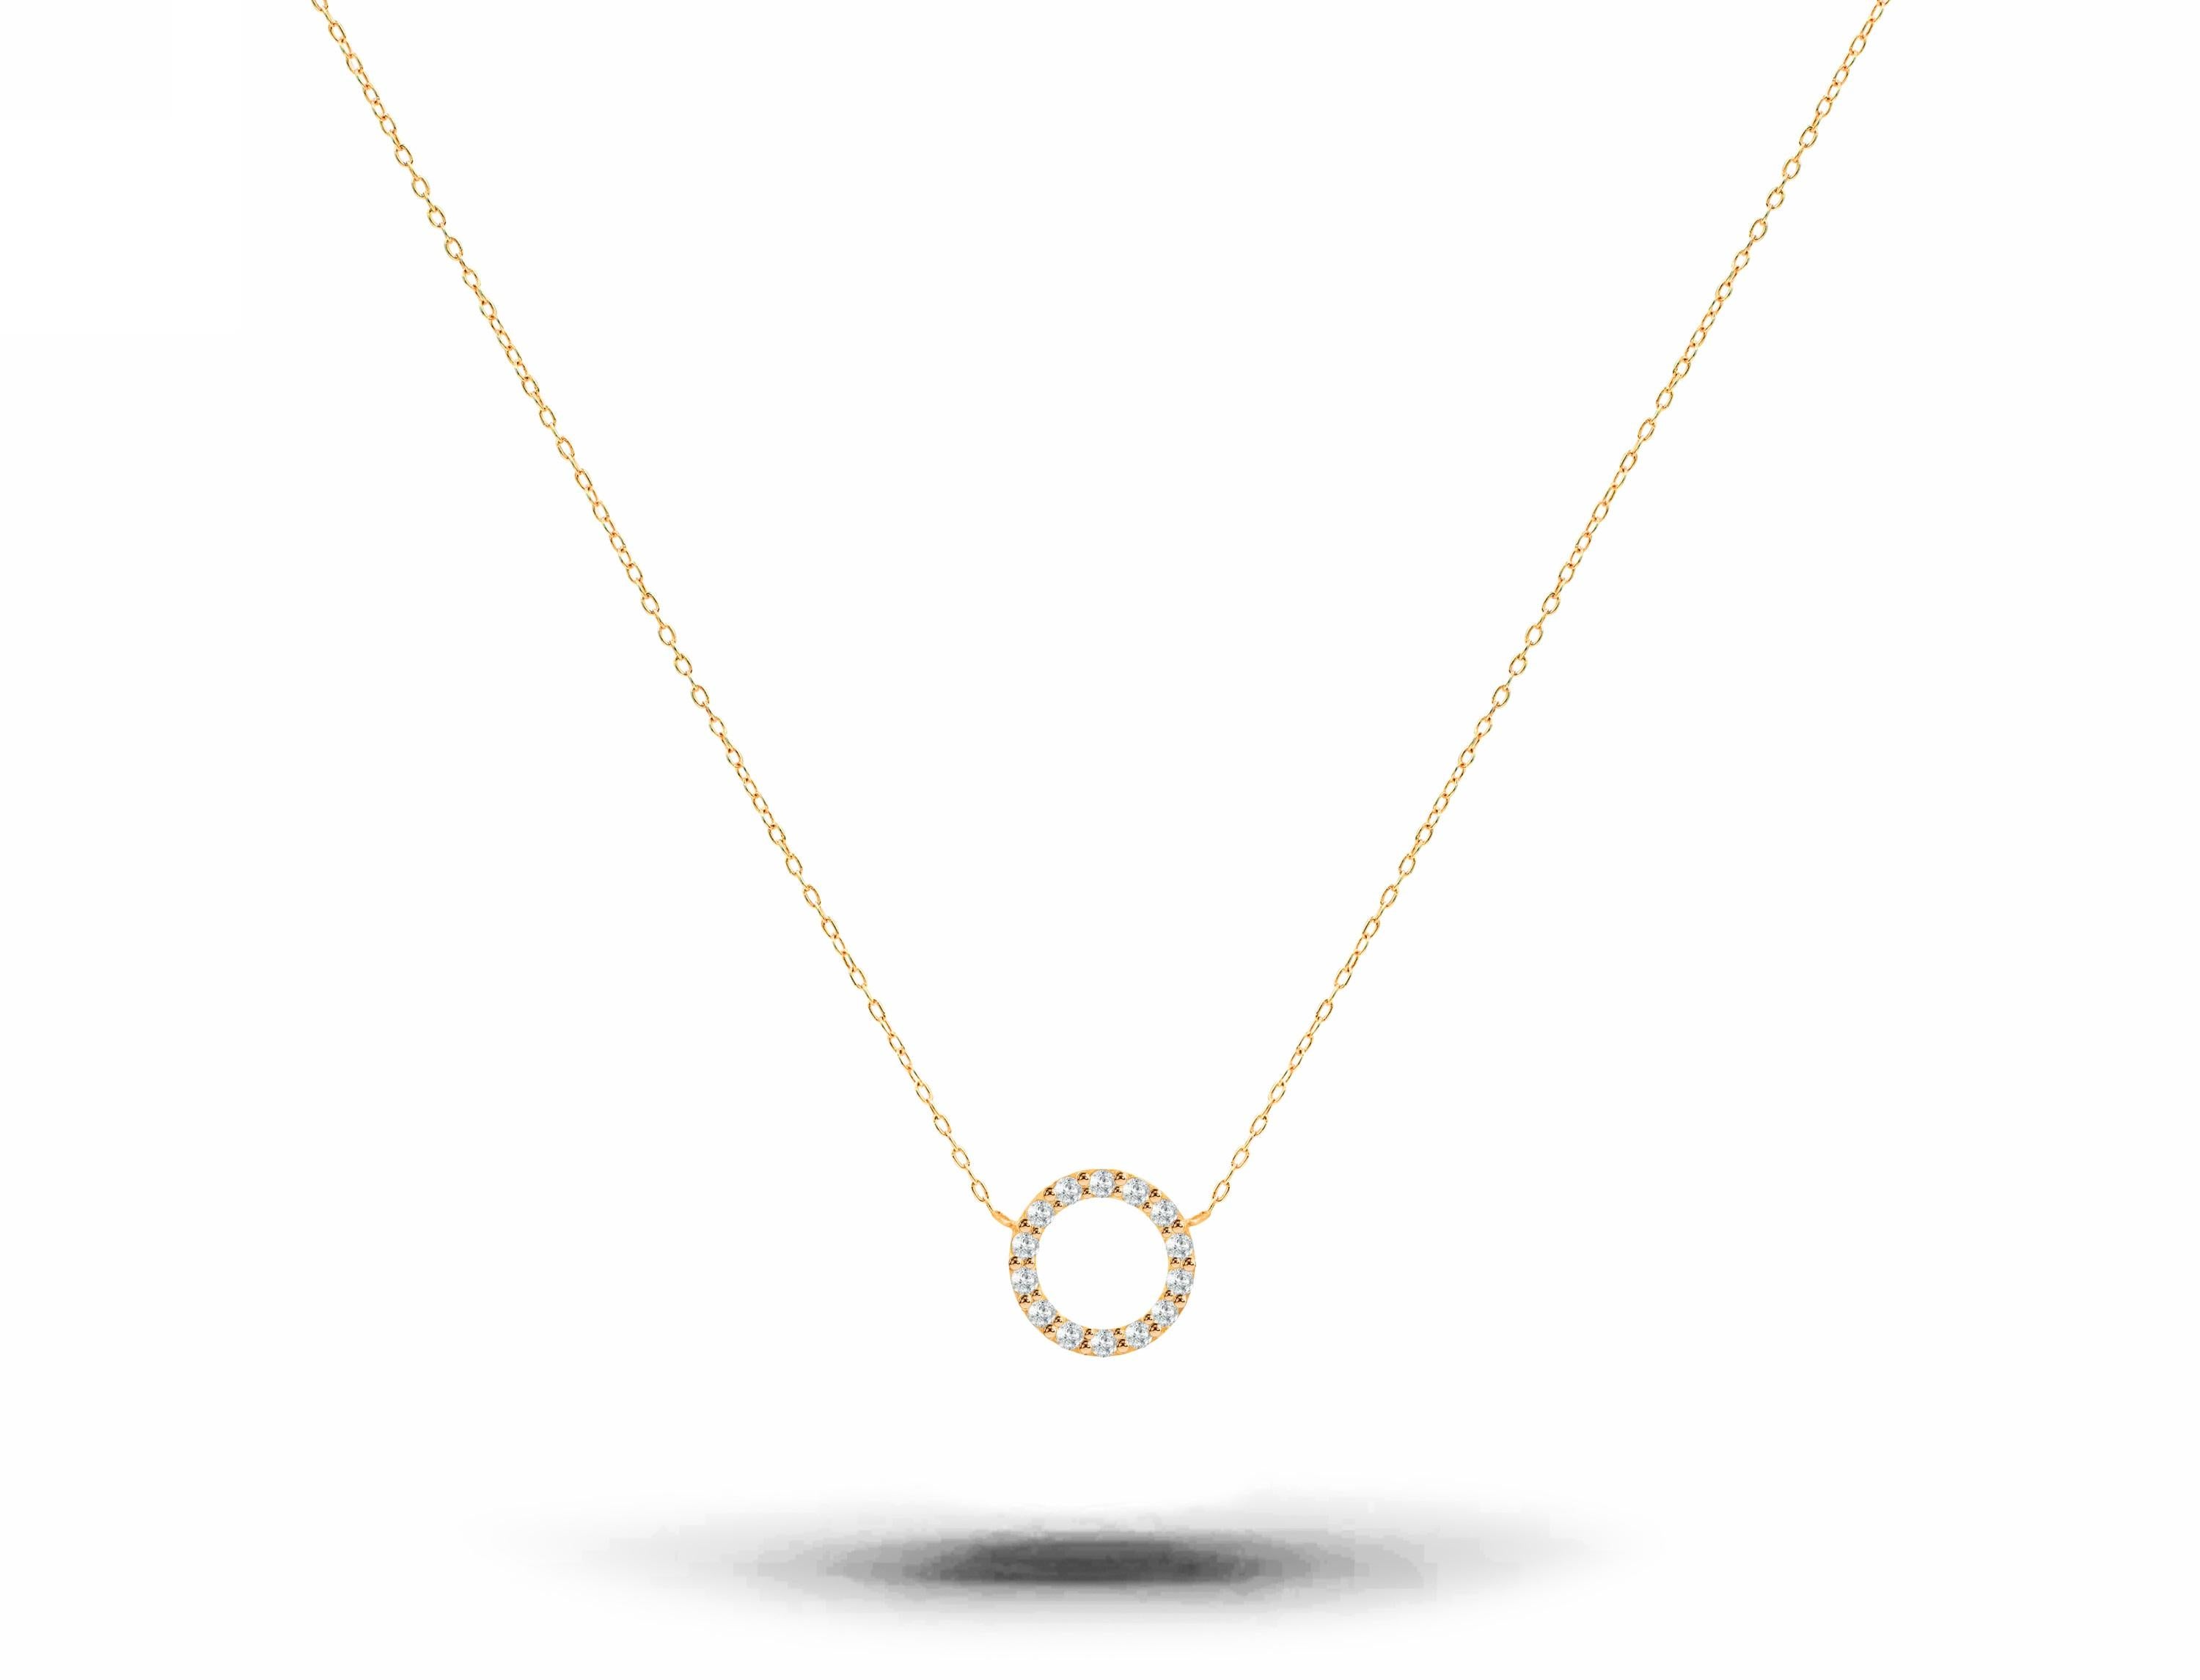 Diamond Circle Necklace is made of 18k solid gold available in three colors of gold, White Gold / Rose Gold / Yellow Gold.

Natural genuine round cut diamond each diamond is hand selected by me to ensure quality and set by a master setter in our